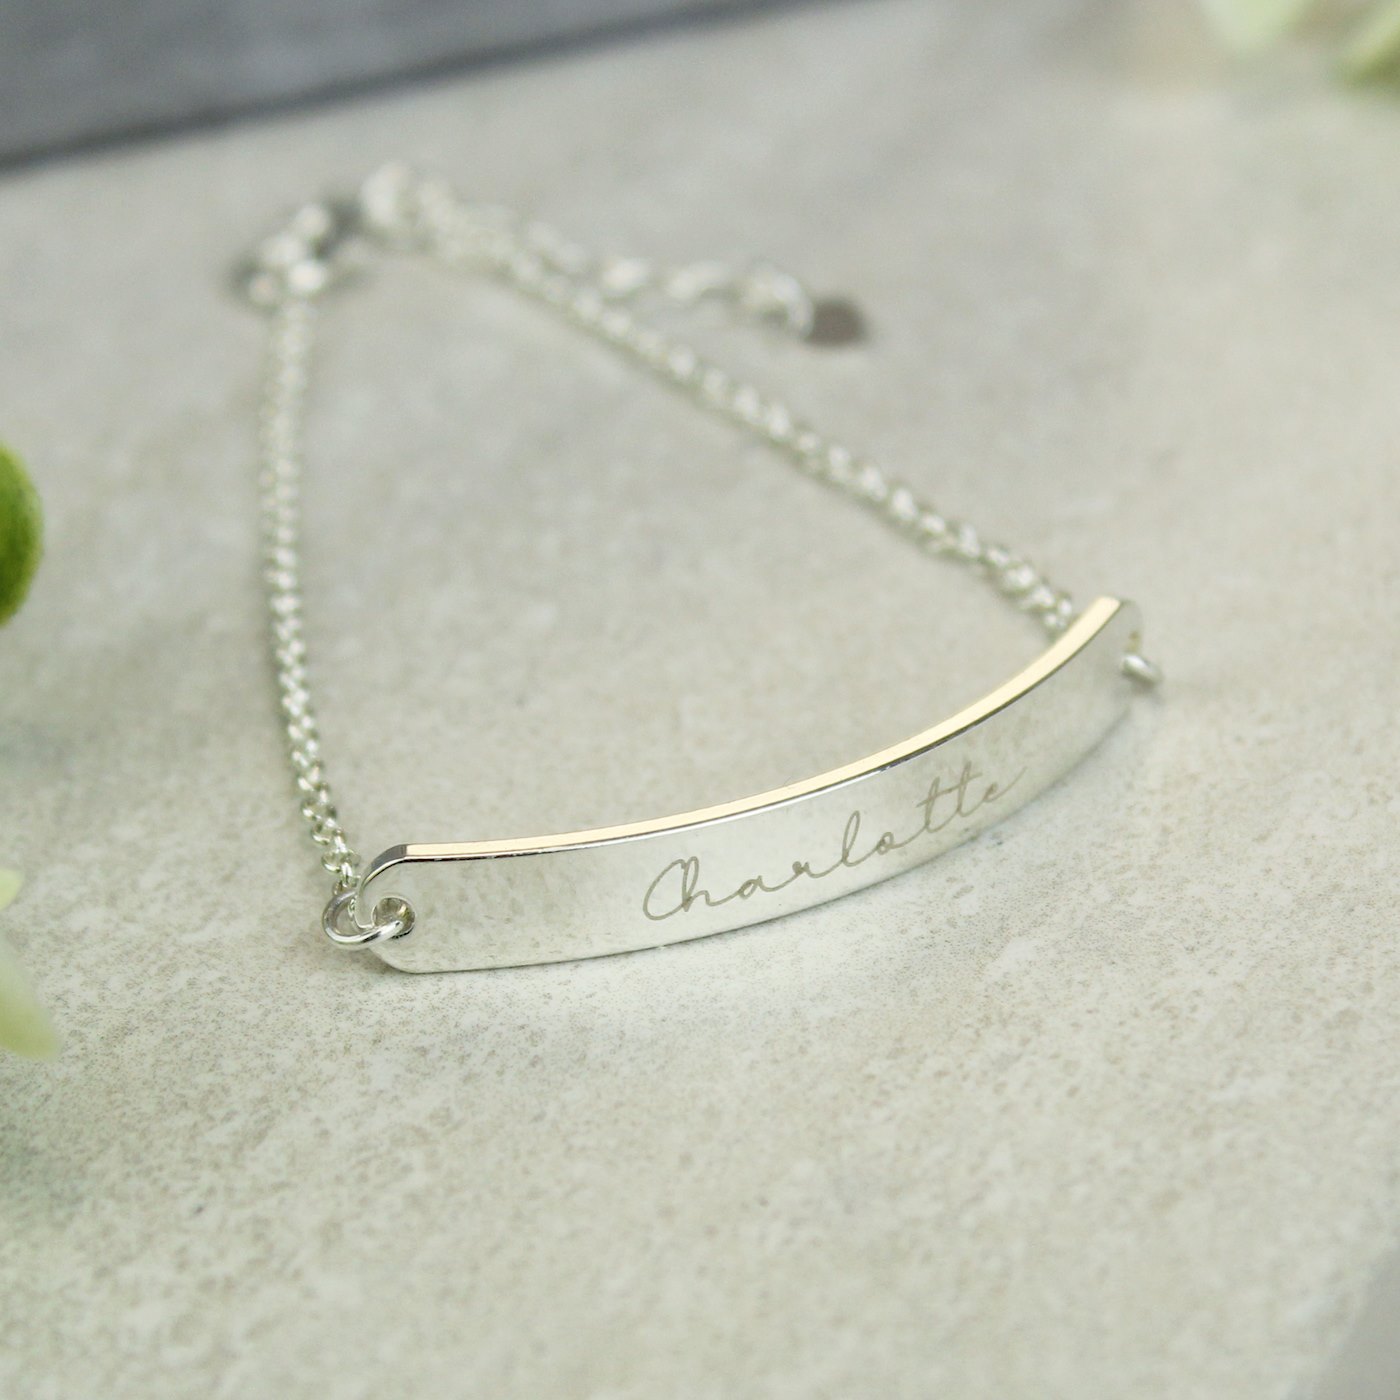 Personalised Name Only Silver Tone Bar Bracelet  SpecialMomentcouk